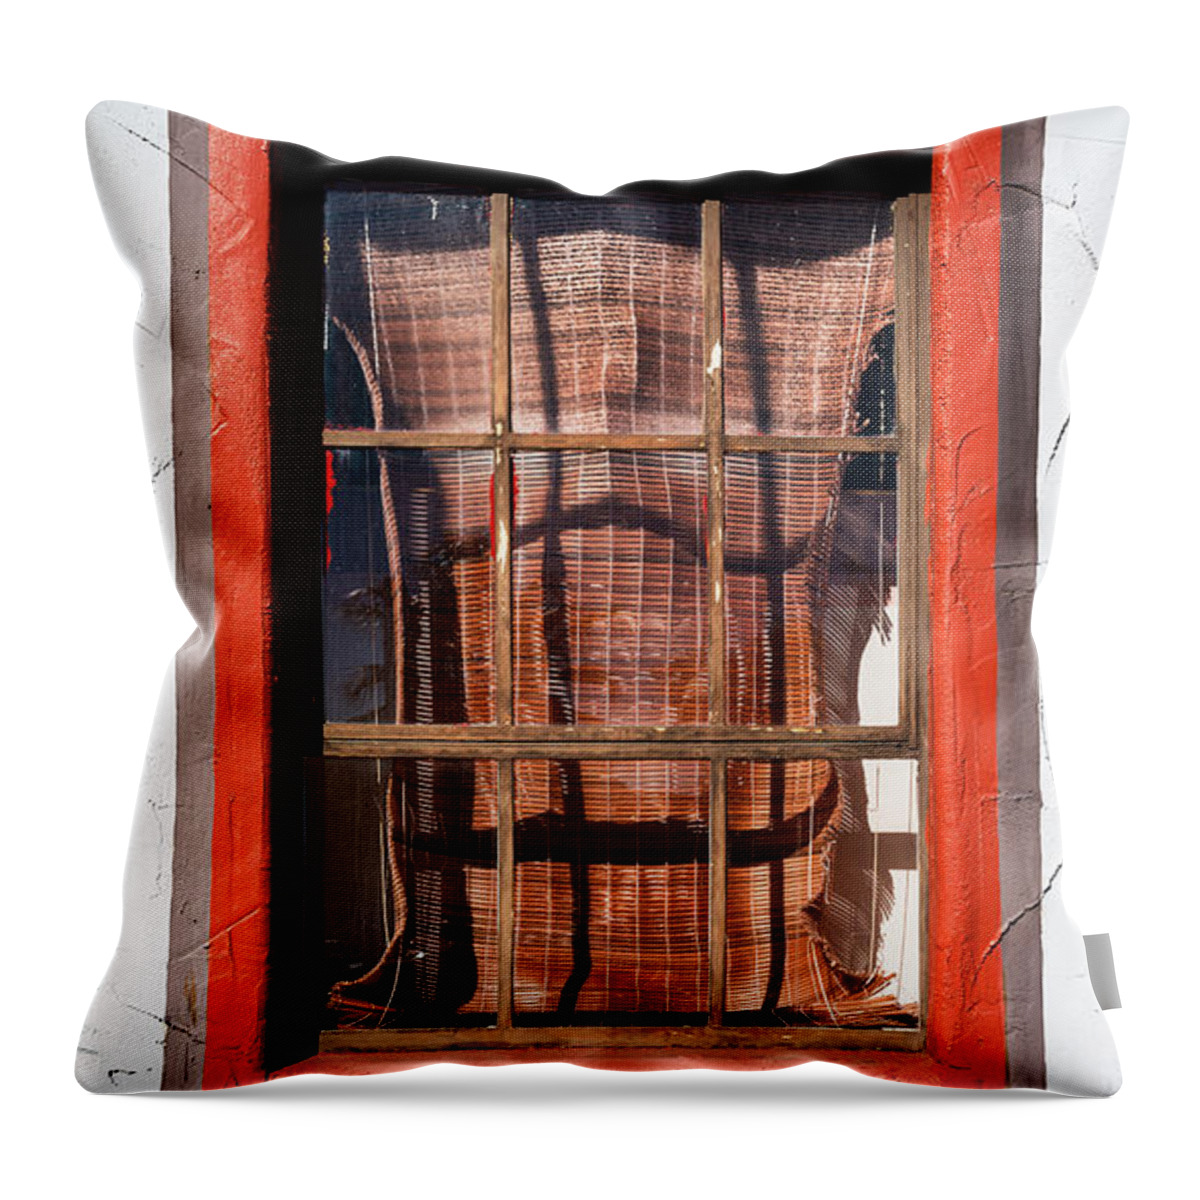 Historic Vintage Old Window Architecture Throw Pillow featuring the photograph Rustic Doors Windows Palm Springs 0392-100 by Amyn Nasser